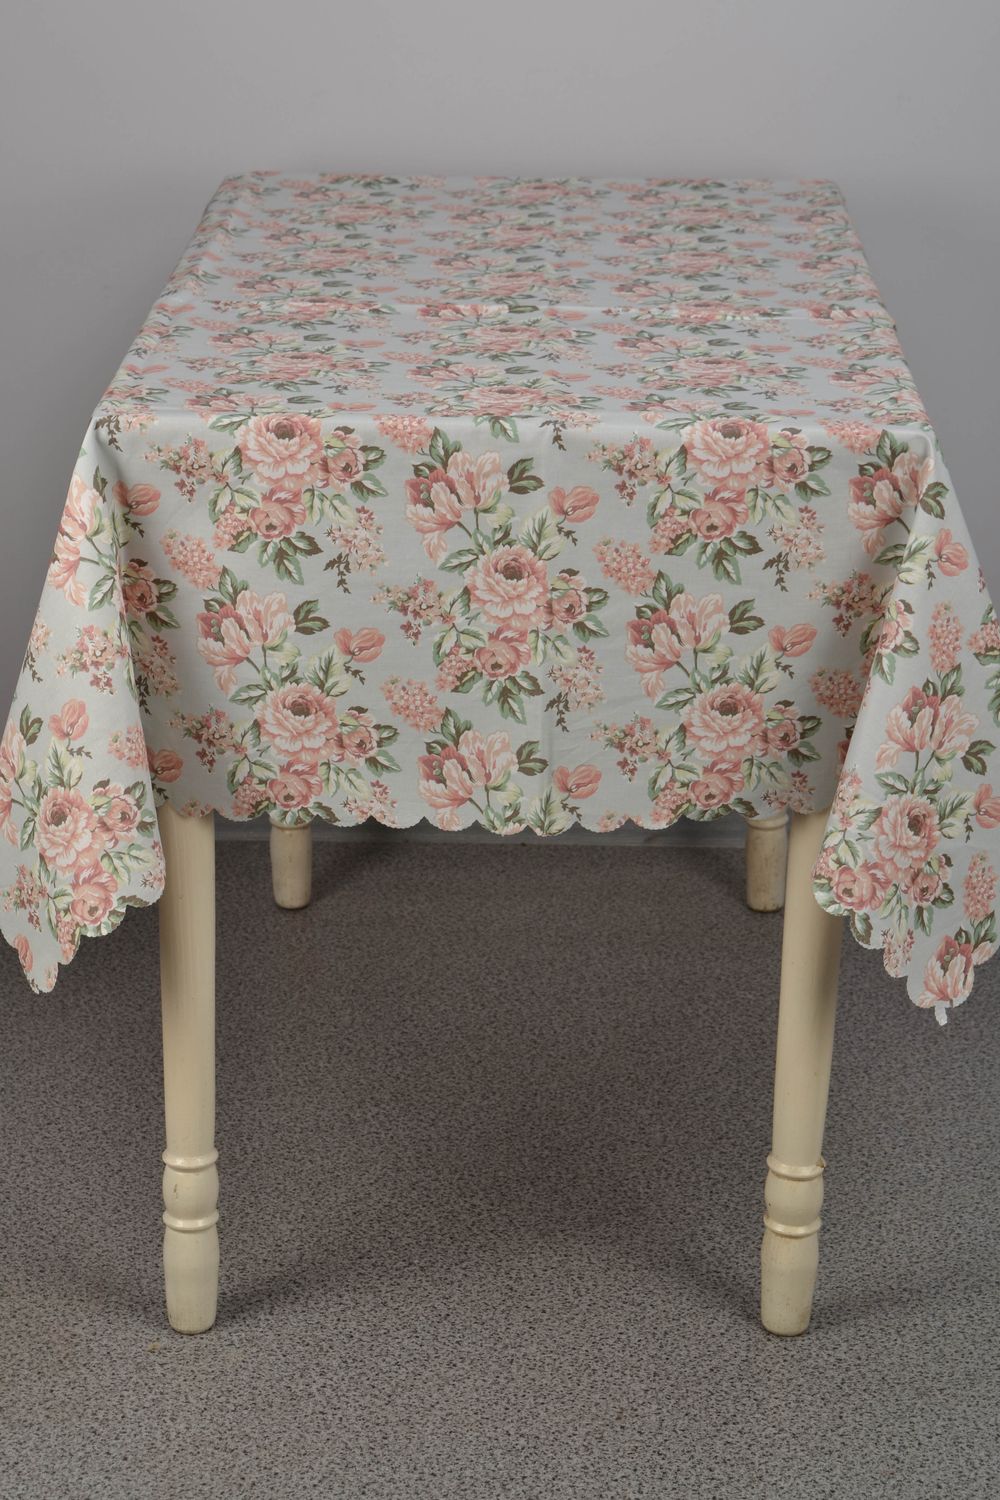 Cotton tablecloth with flower print photo 2